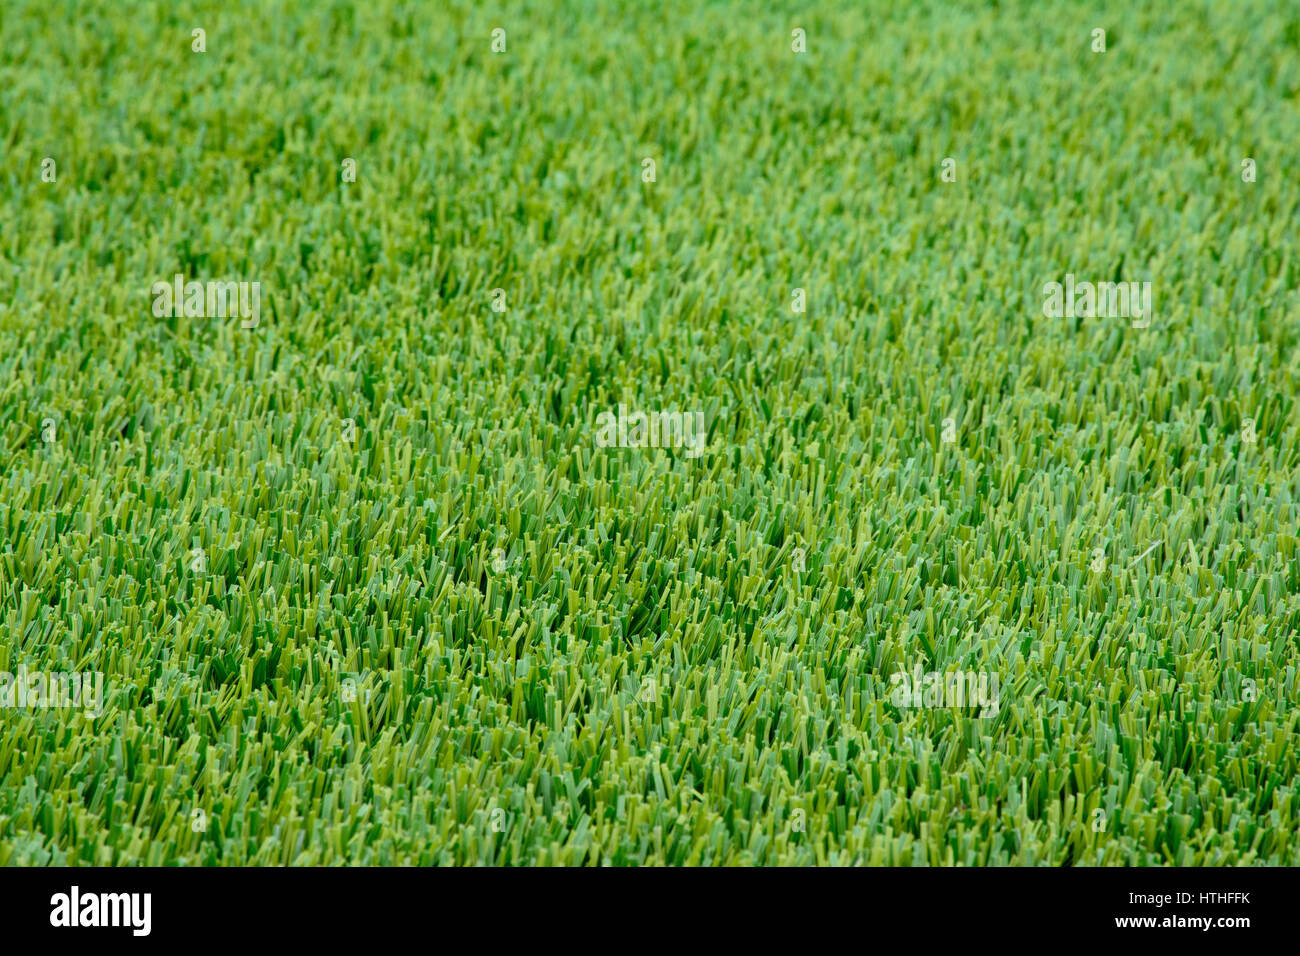 Close-up sample of winter Ryegrass lawn with perfectly trimmed, green, lush, thick fine bladed rye Stock Photo